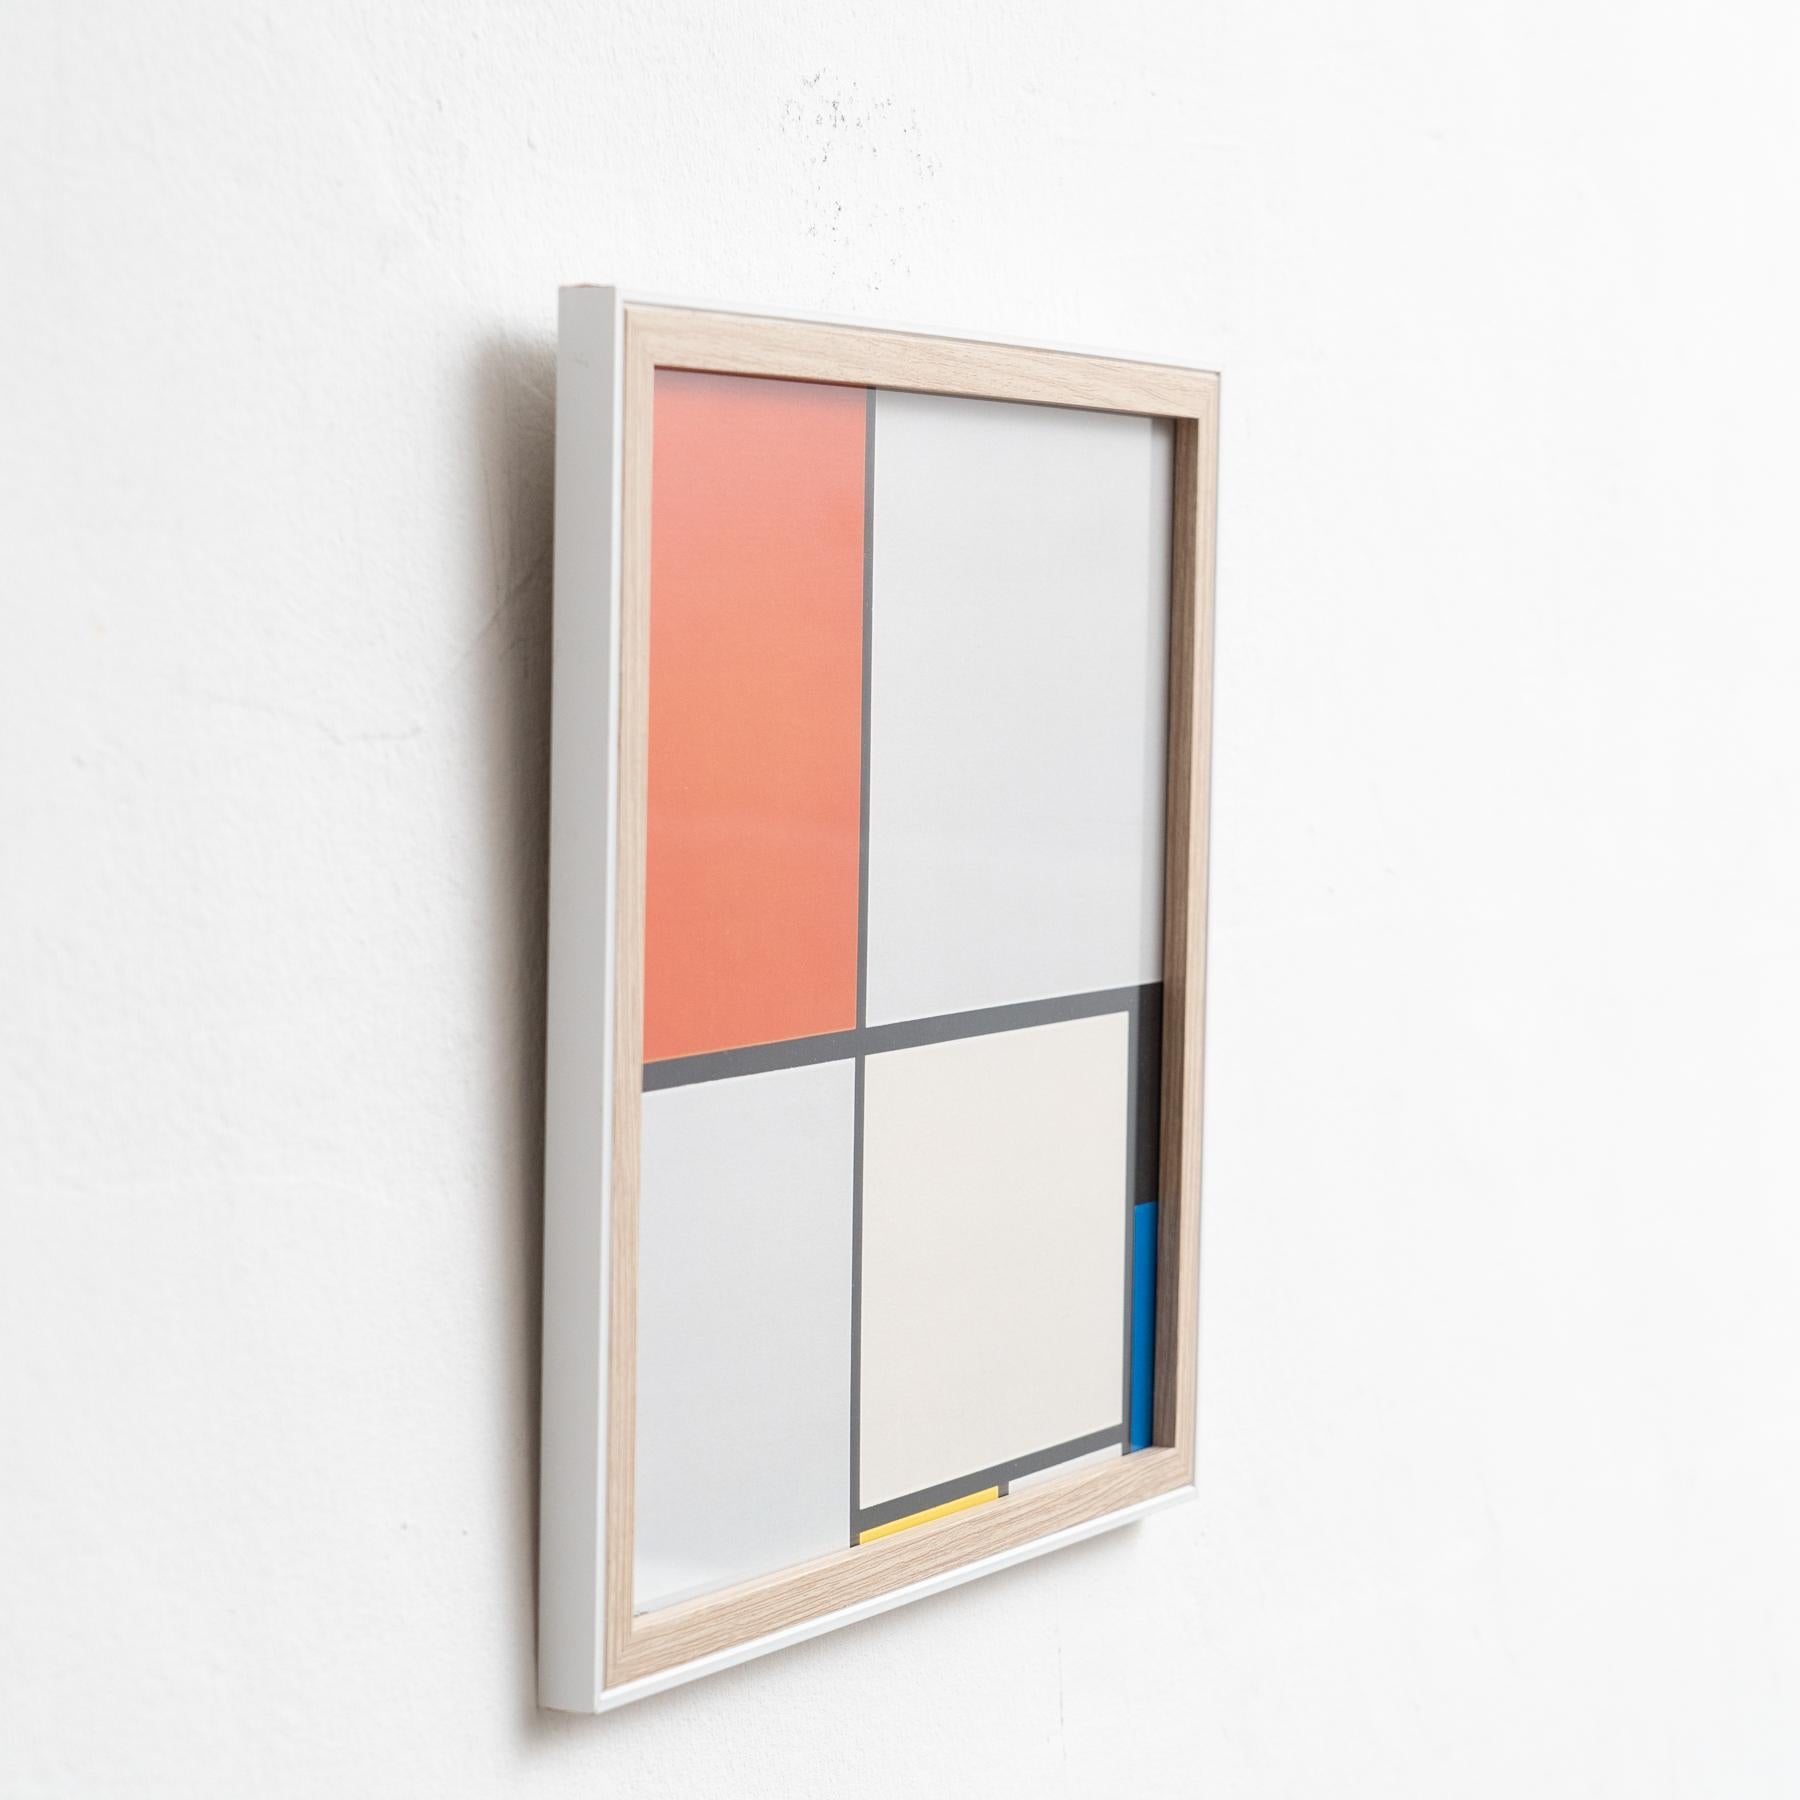 Piet Mondrian Late 20th Centry Framed Print In Good Condition For Sale In Barcelona, ES